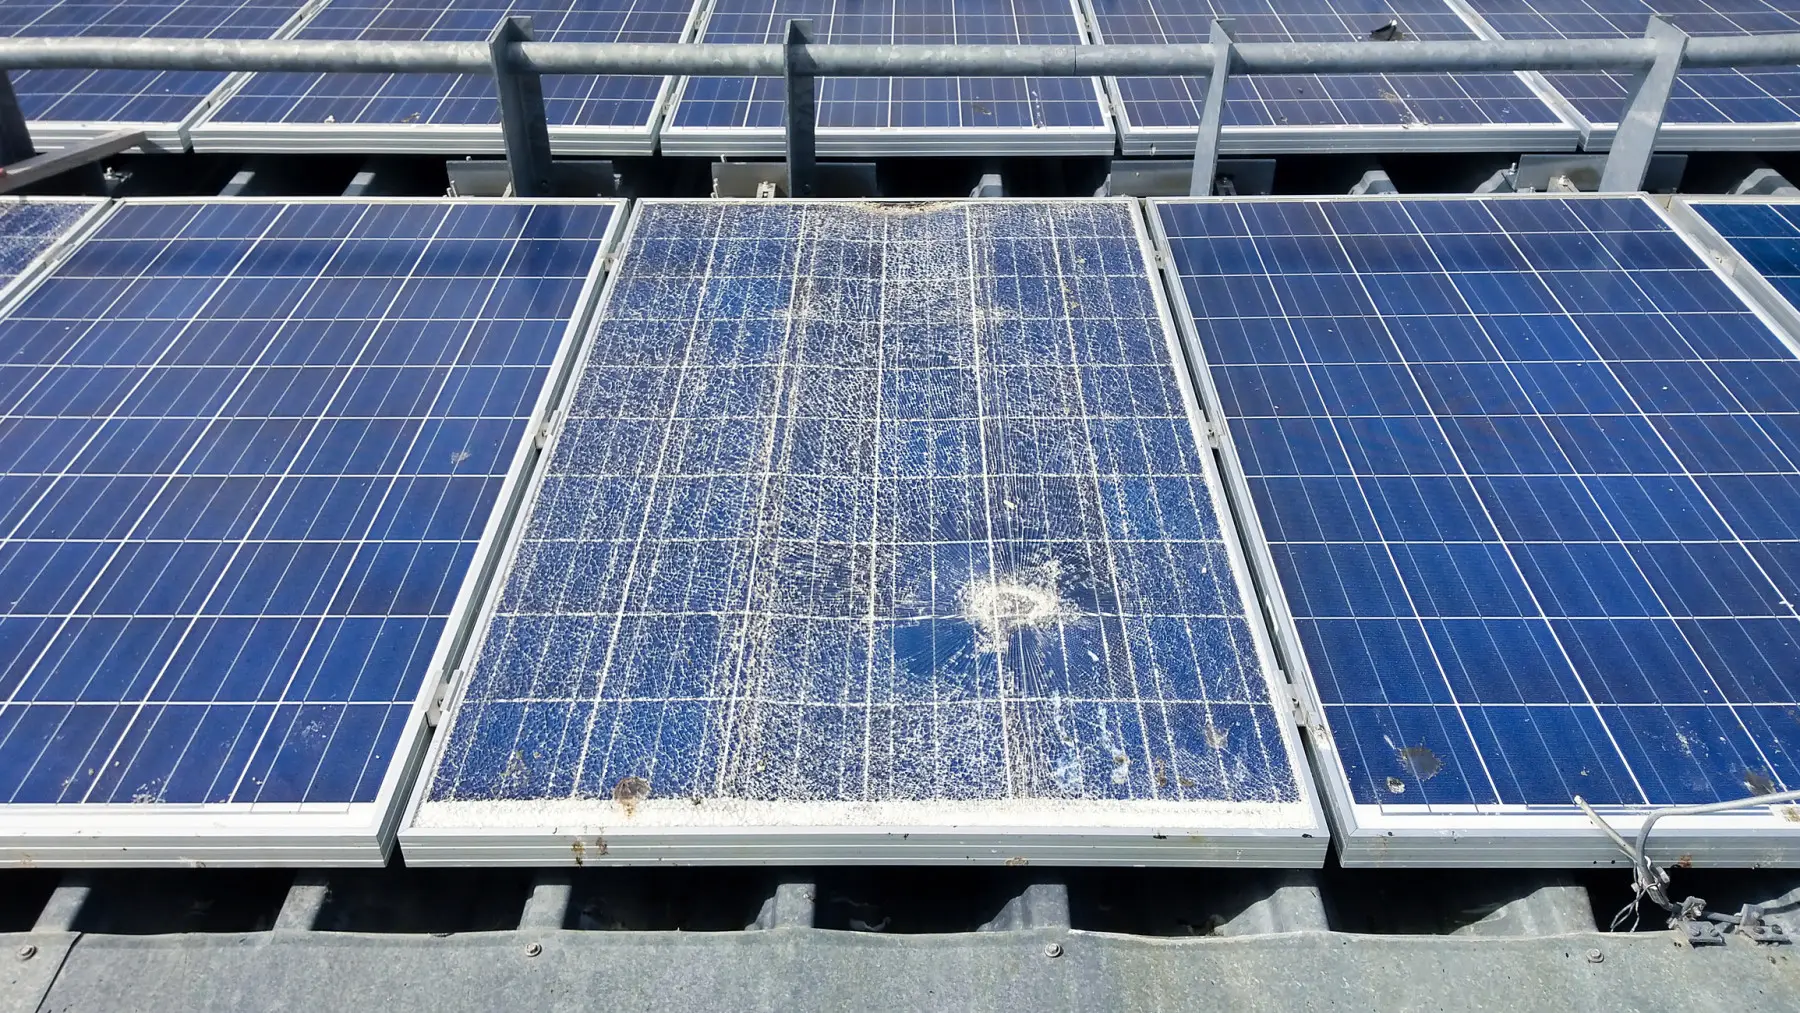 What happens to all those solar panels when they die?